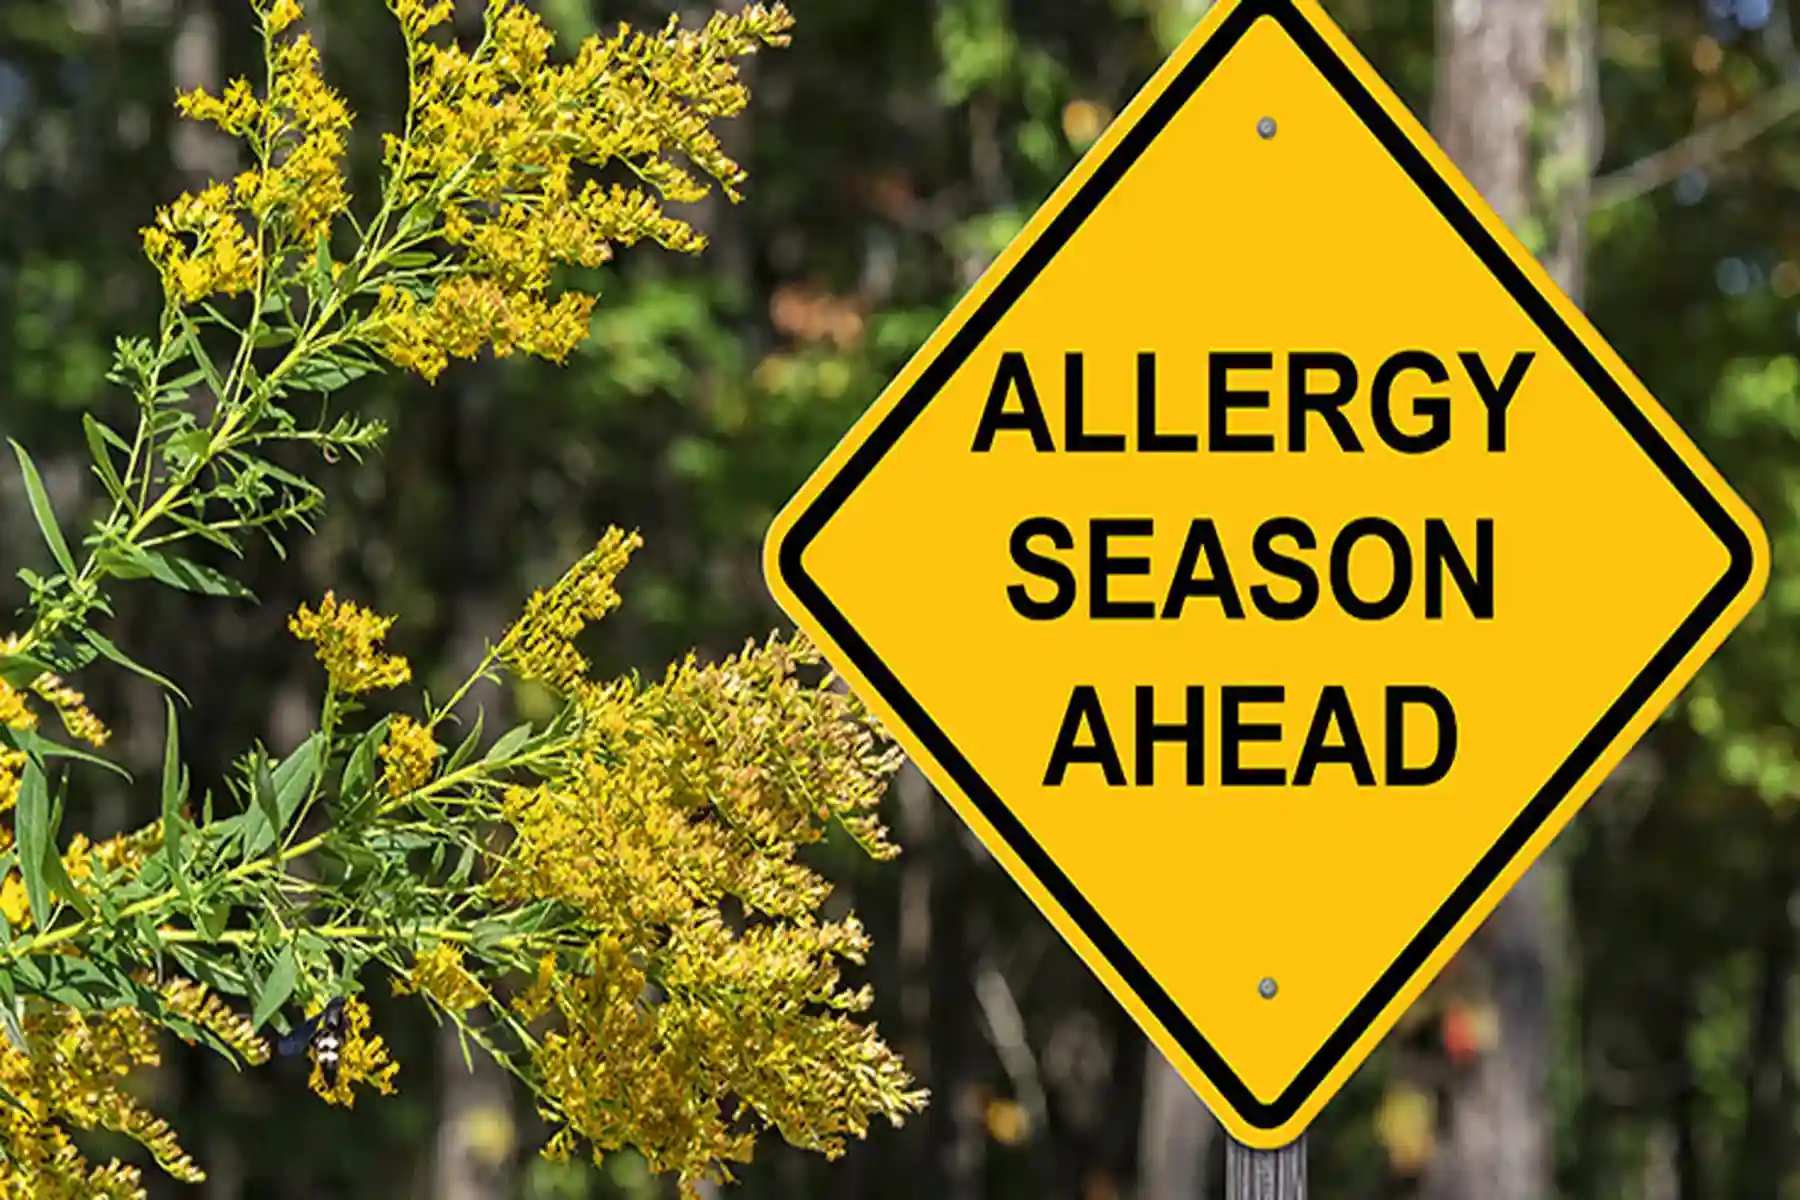 An allergy season sign in the midst of trees.